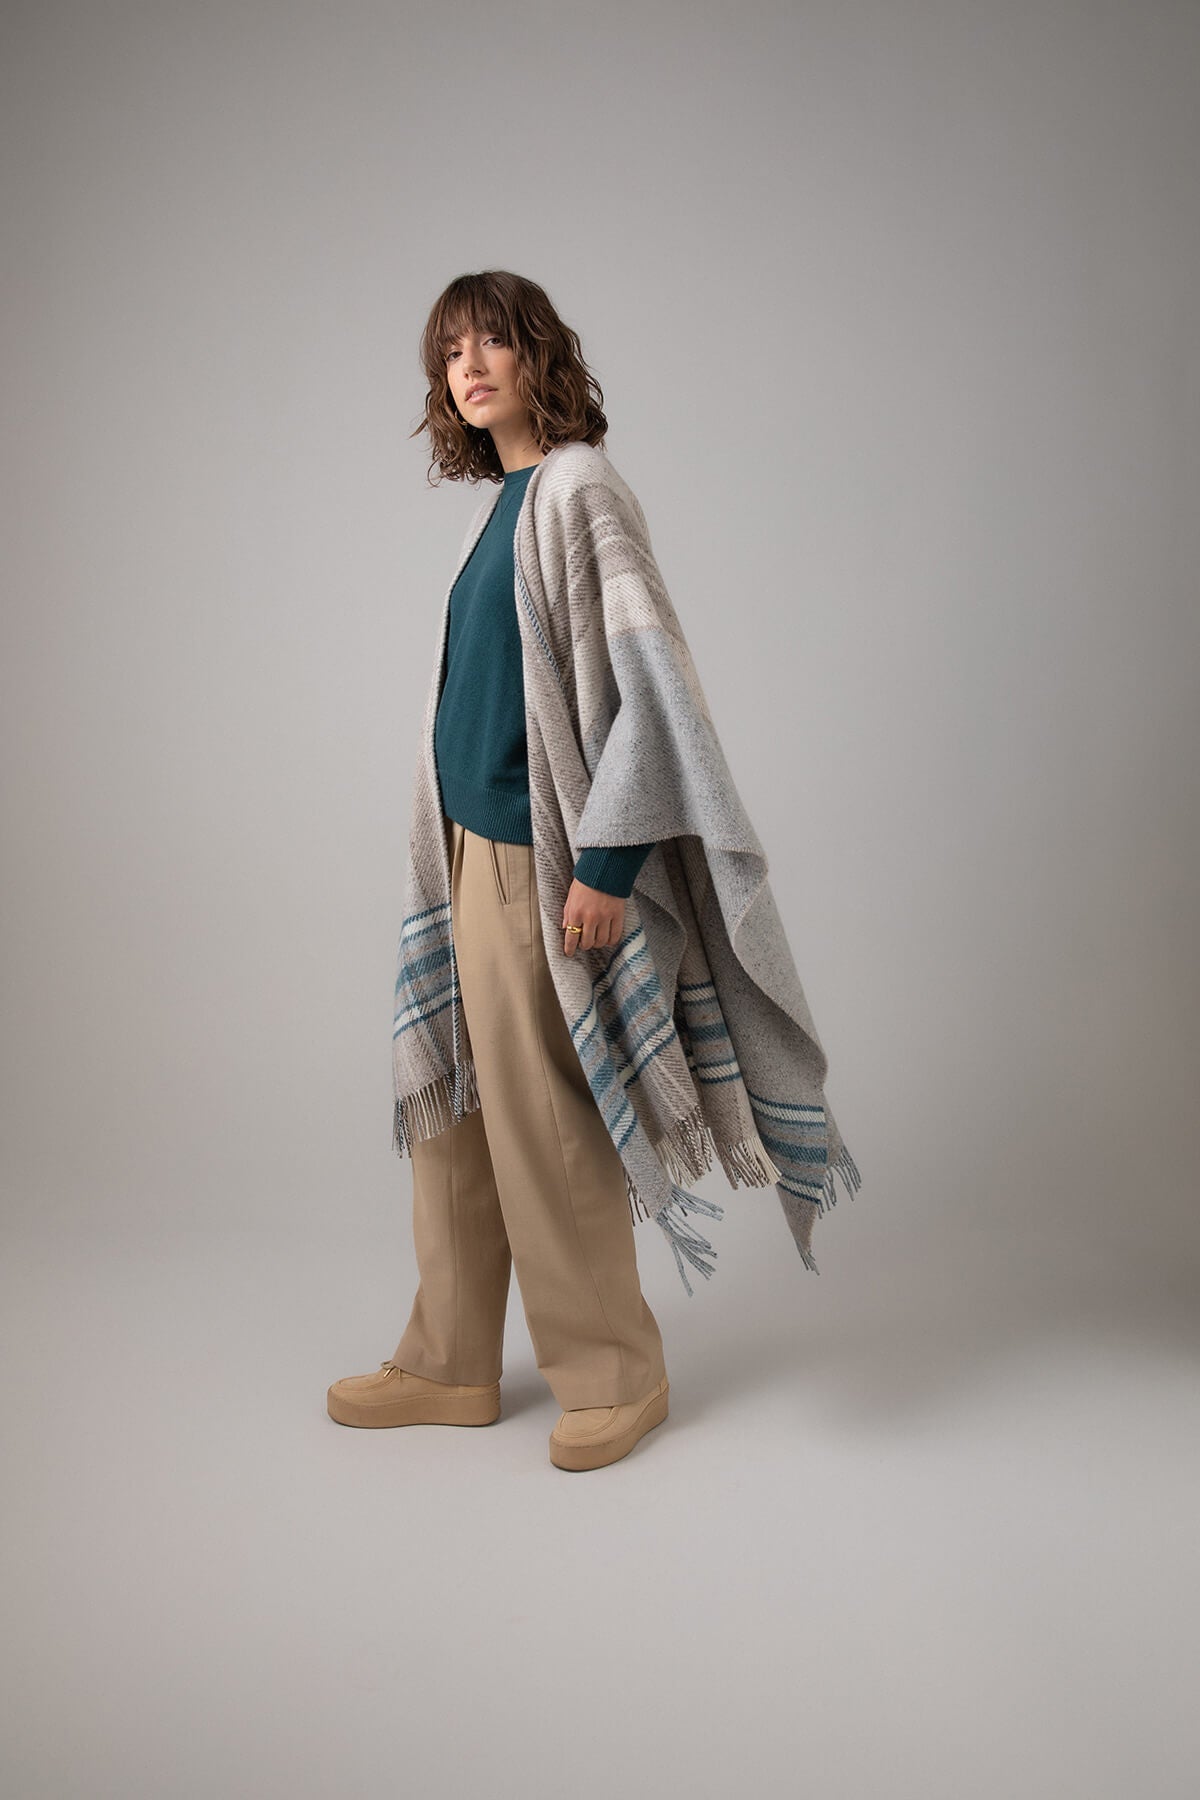 Side of Johnstons of Elgin Cashmere Wool Blend Textured Donegal Cape Natural Multi worn over an Mallard Cashmere Sweater and Camel Trousers on a grey background TB000632RU7370ONE